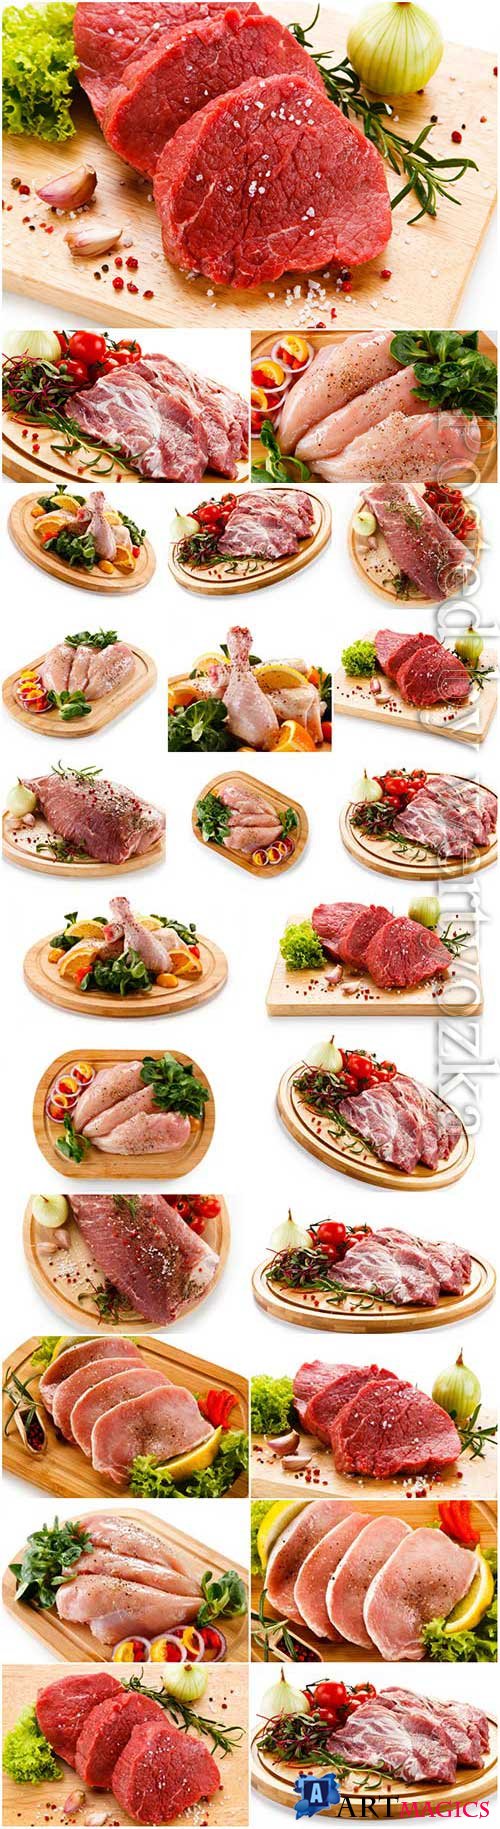 Meat vegetables and spices stock photo